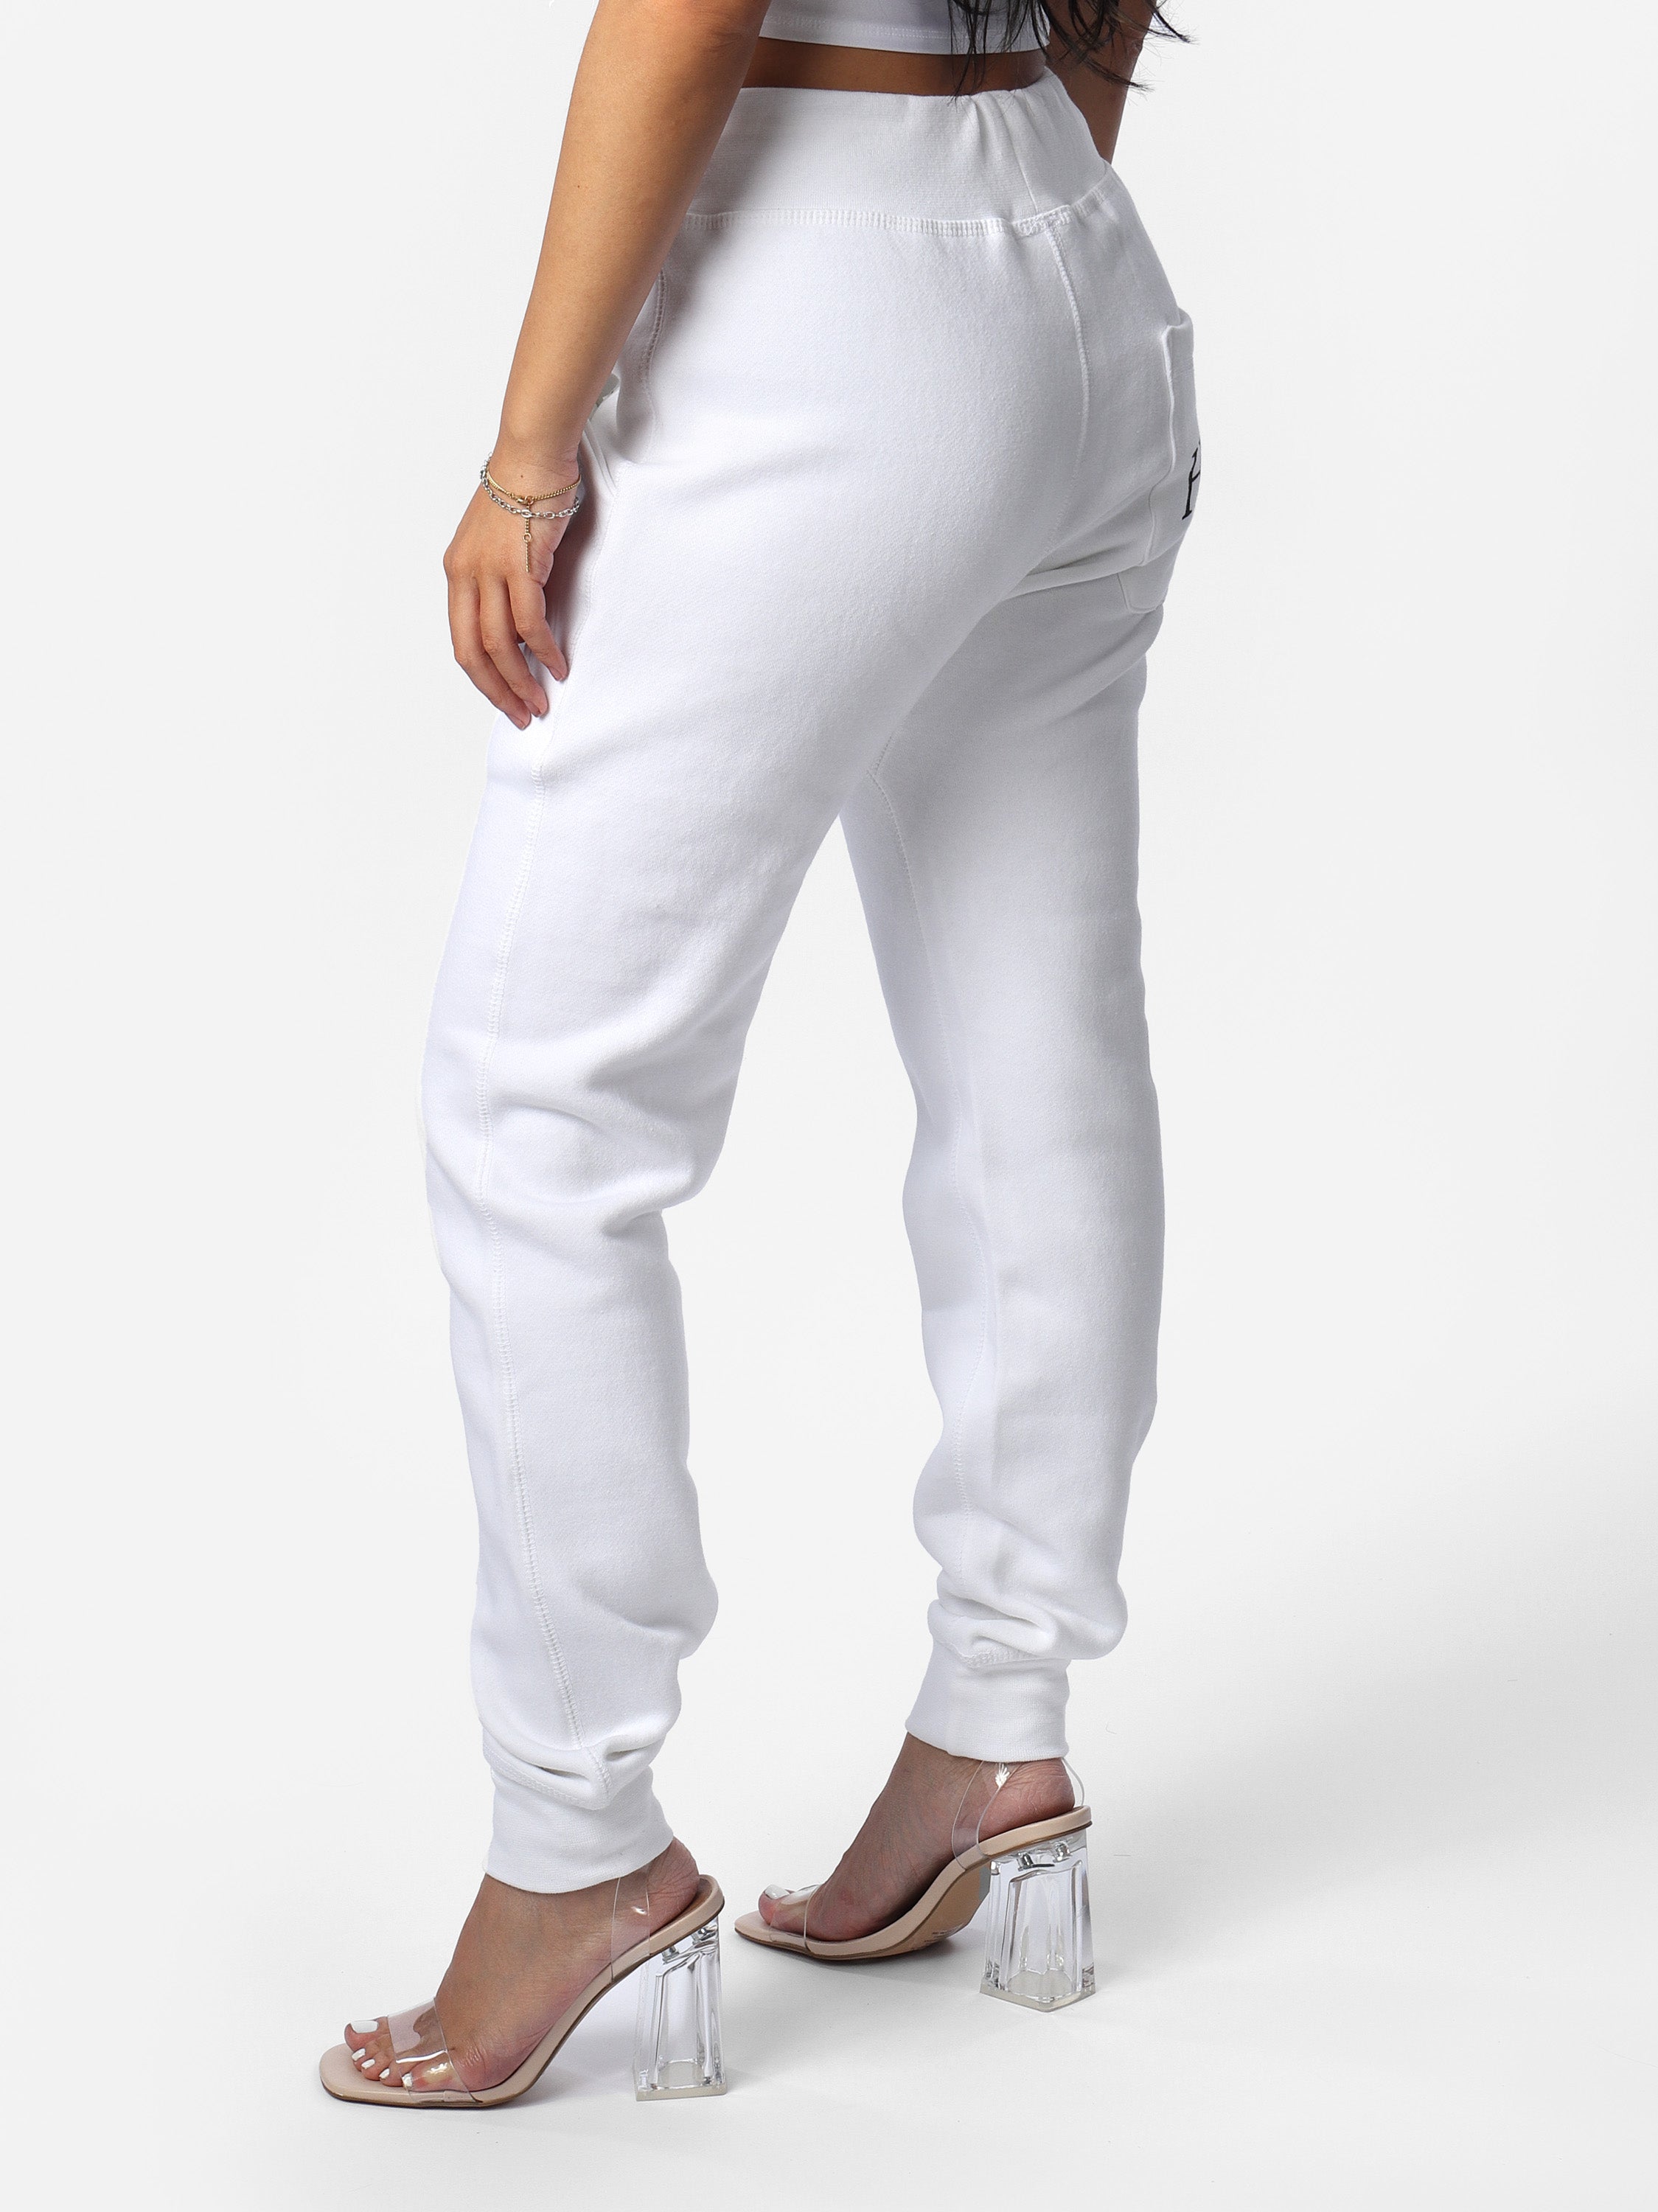 HOF11 White Joggers – House of Eleven by Silva Twins